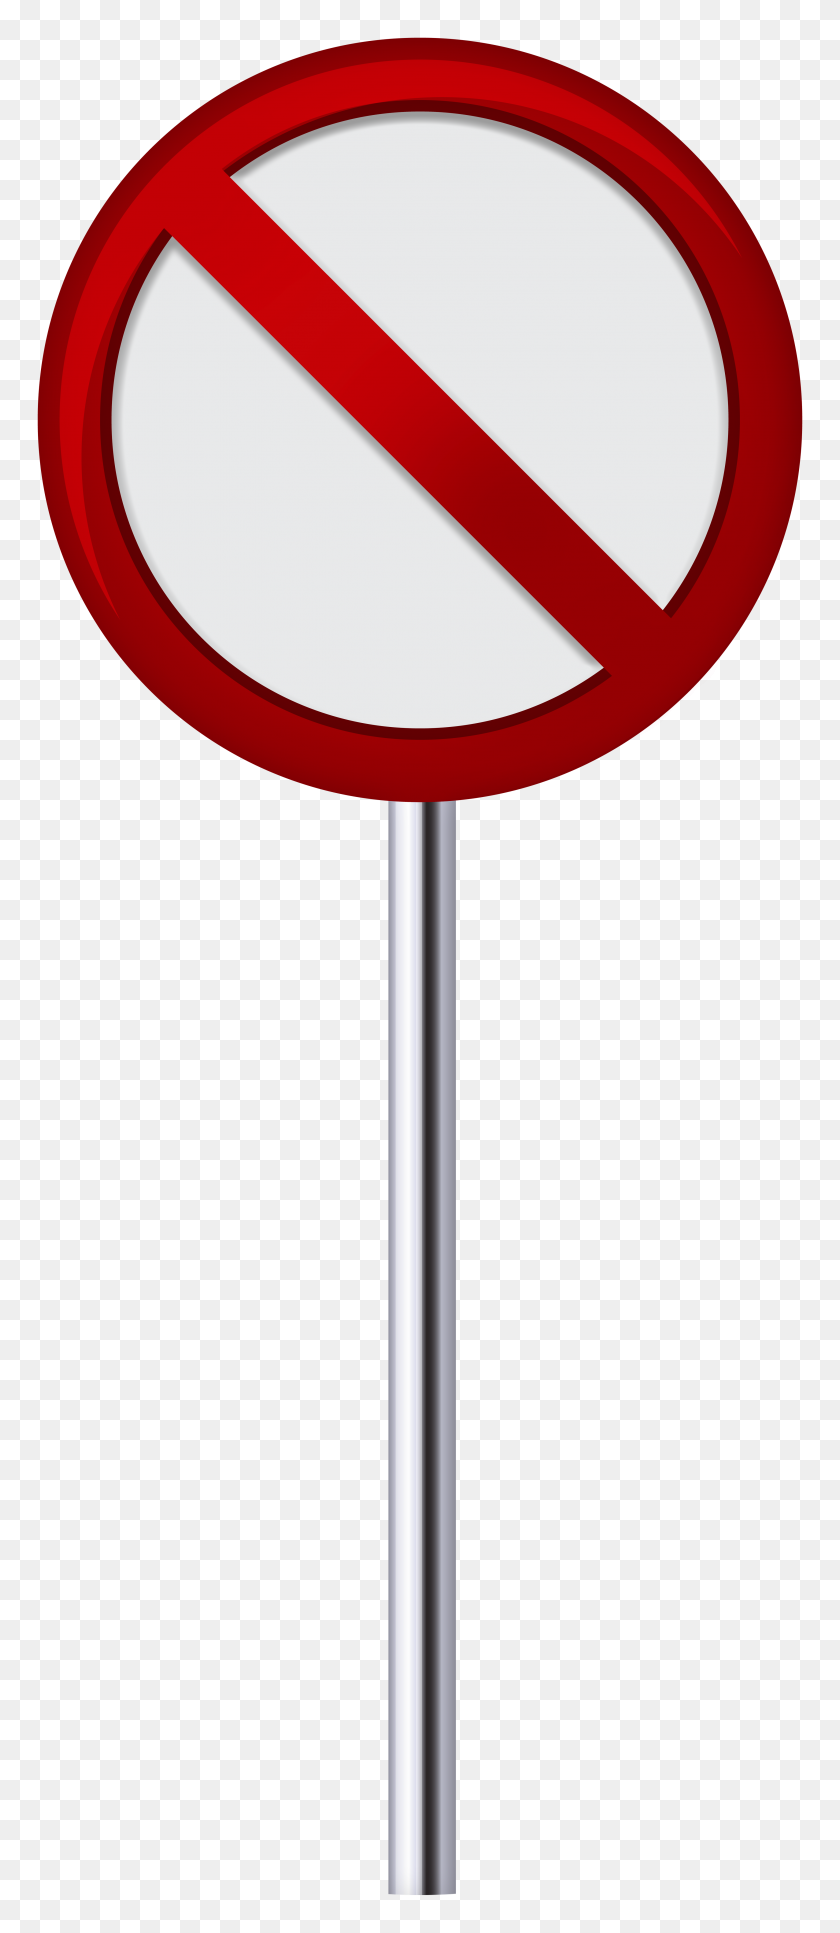 3331x8000 No Entry Traffic Sign Png Clip Art - Fork In The Road Clipart